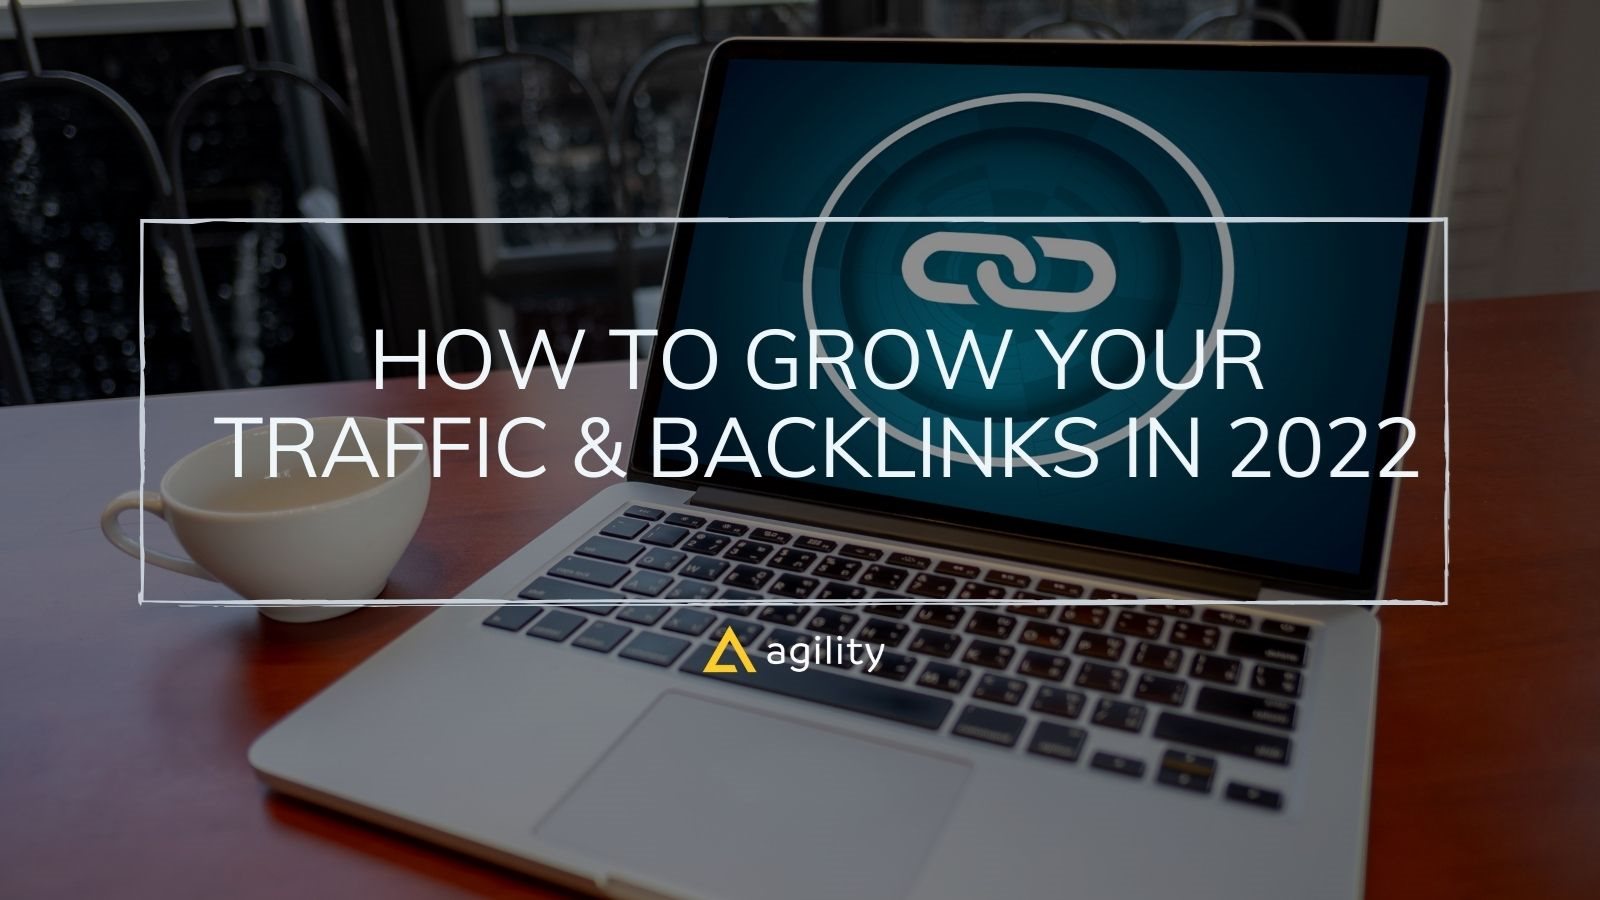 How to Grow Your Traffic & Backlinks in 2022